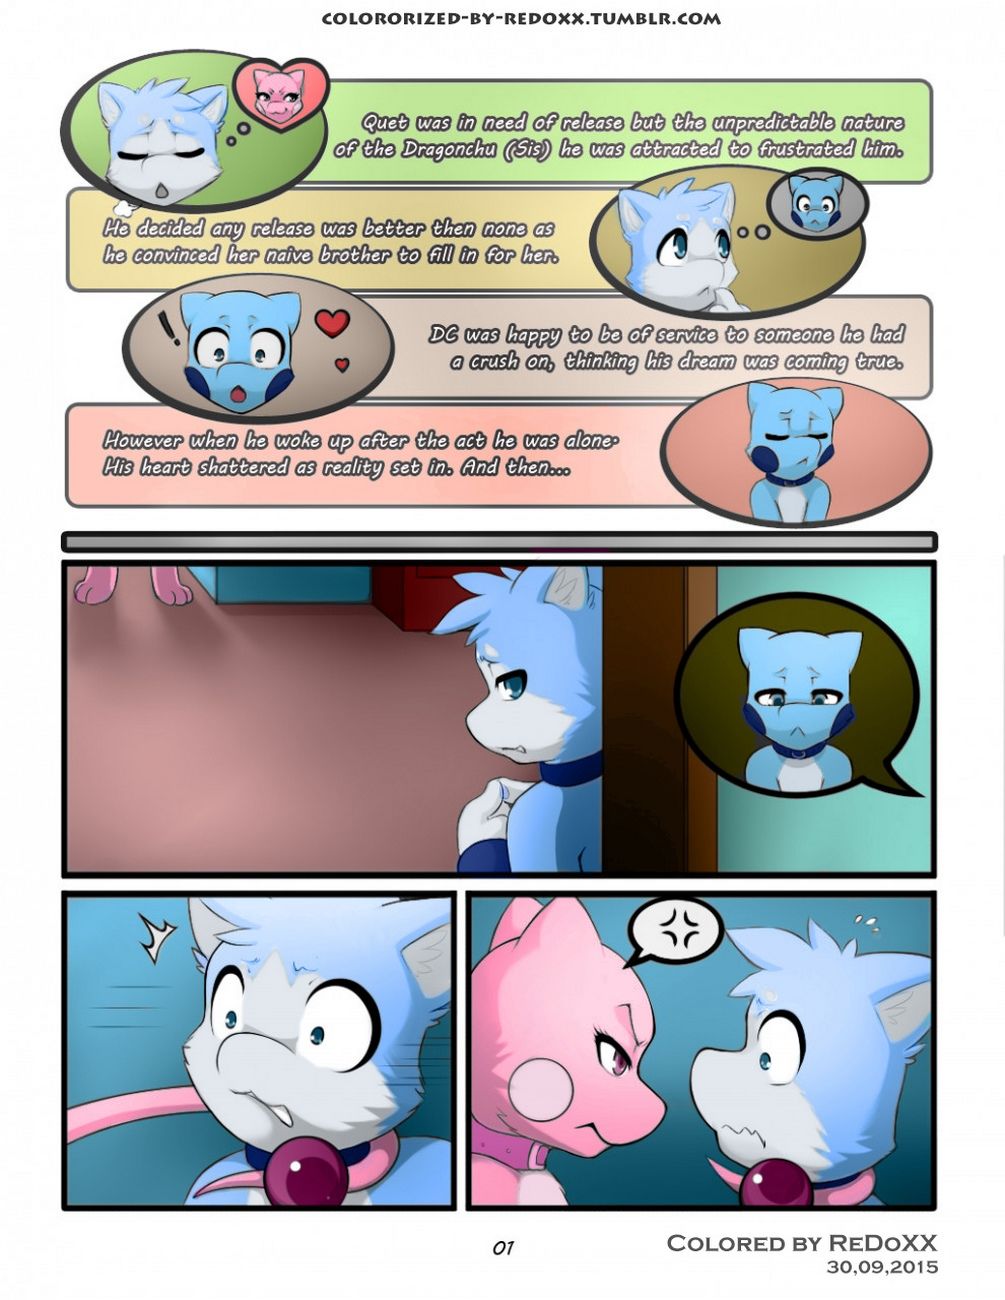 Change Of Rules page 1